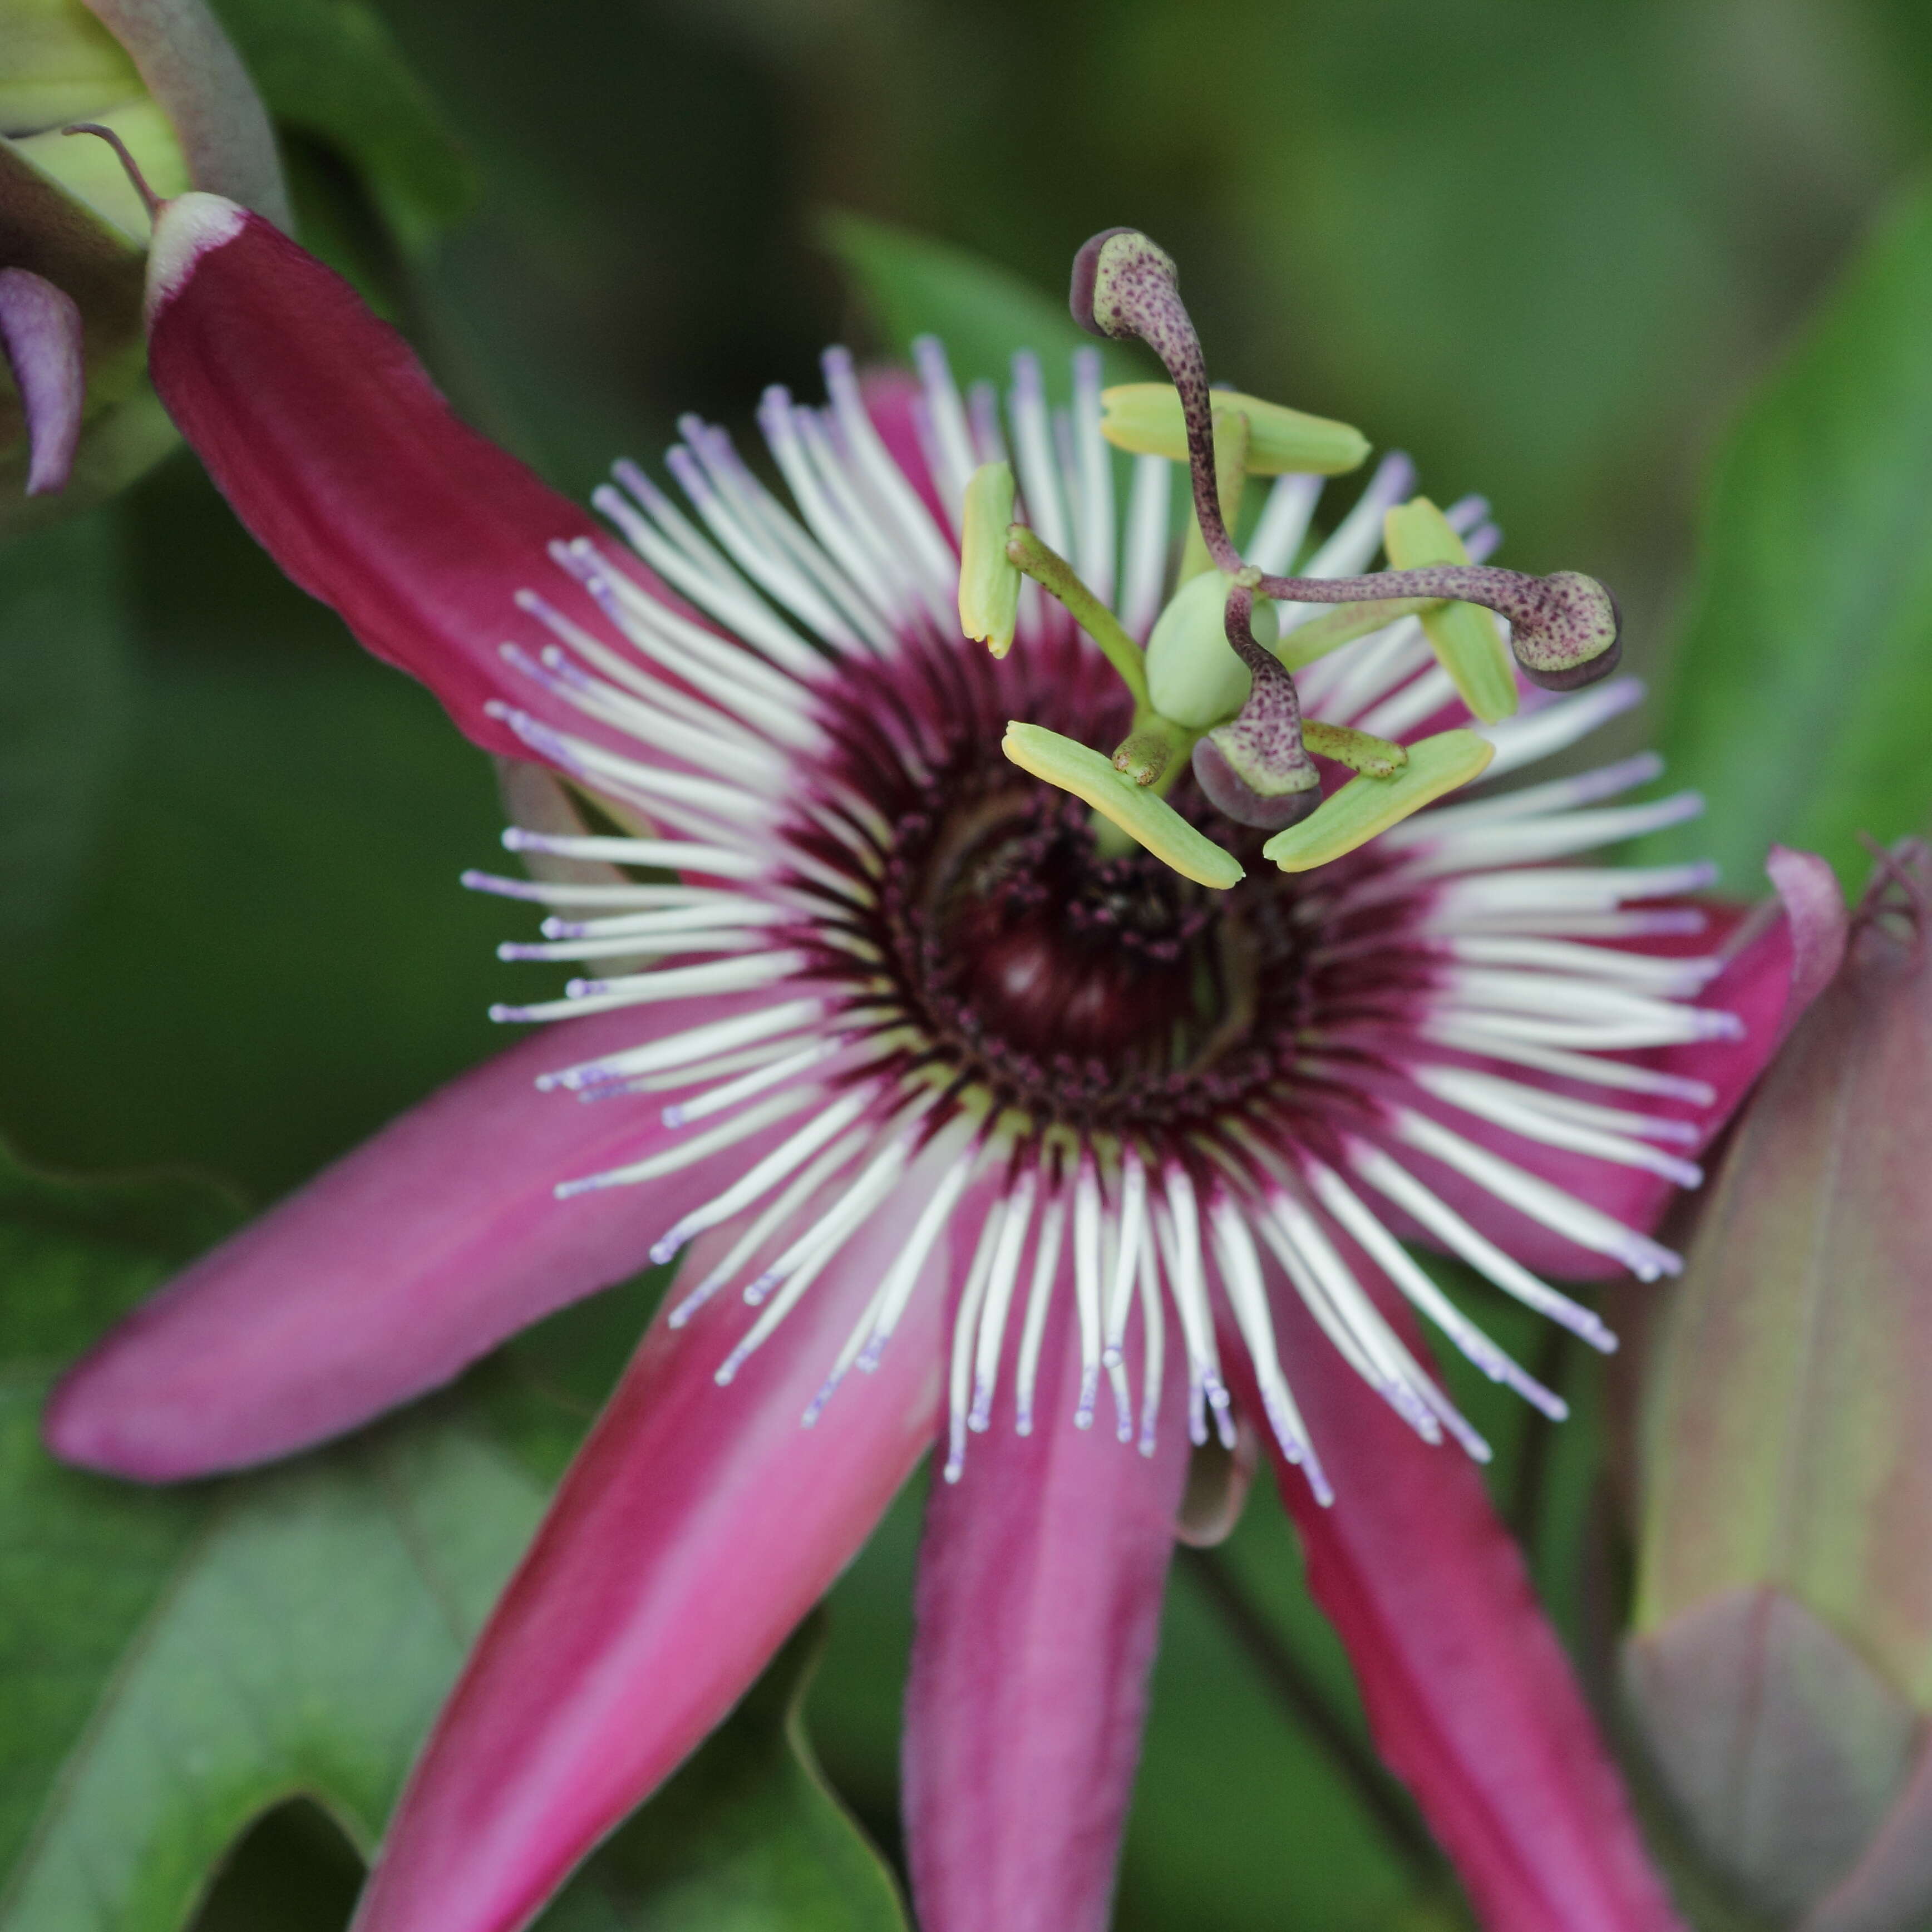 Image of violet passionflower